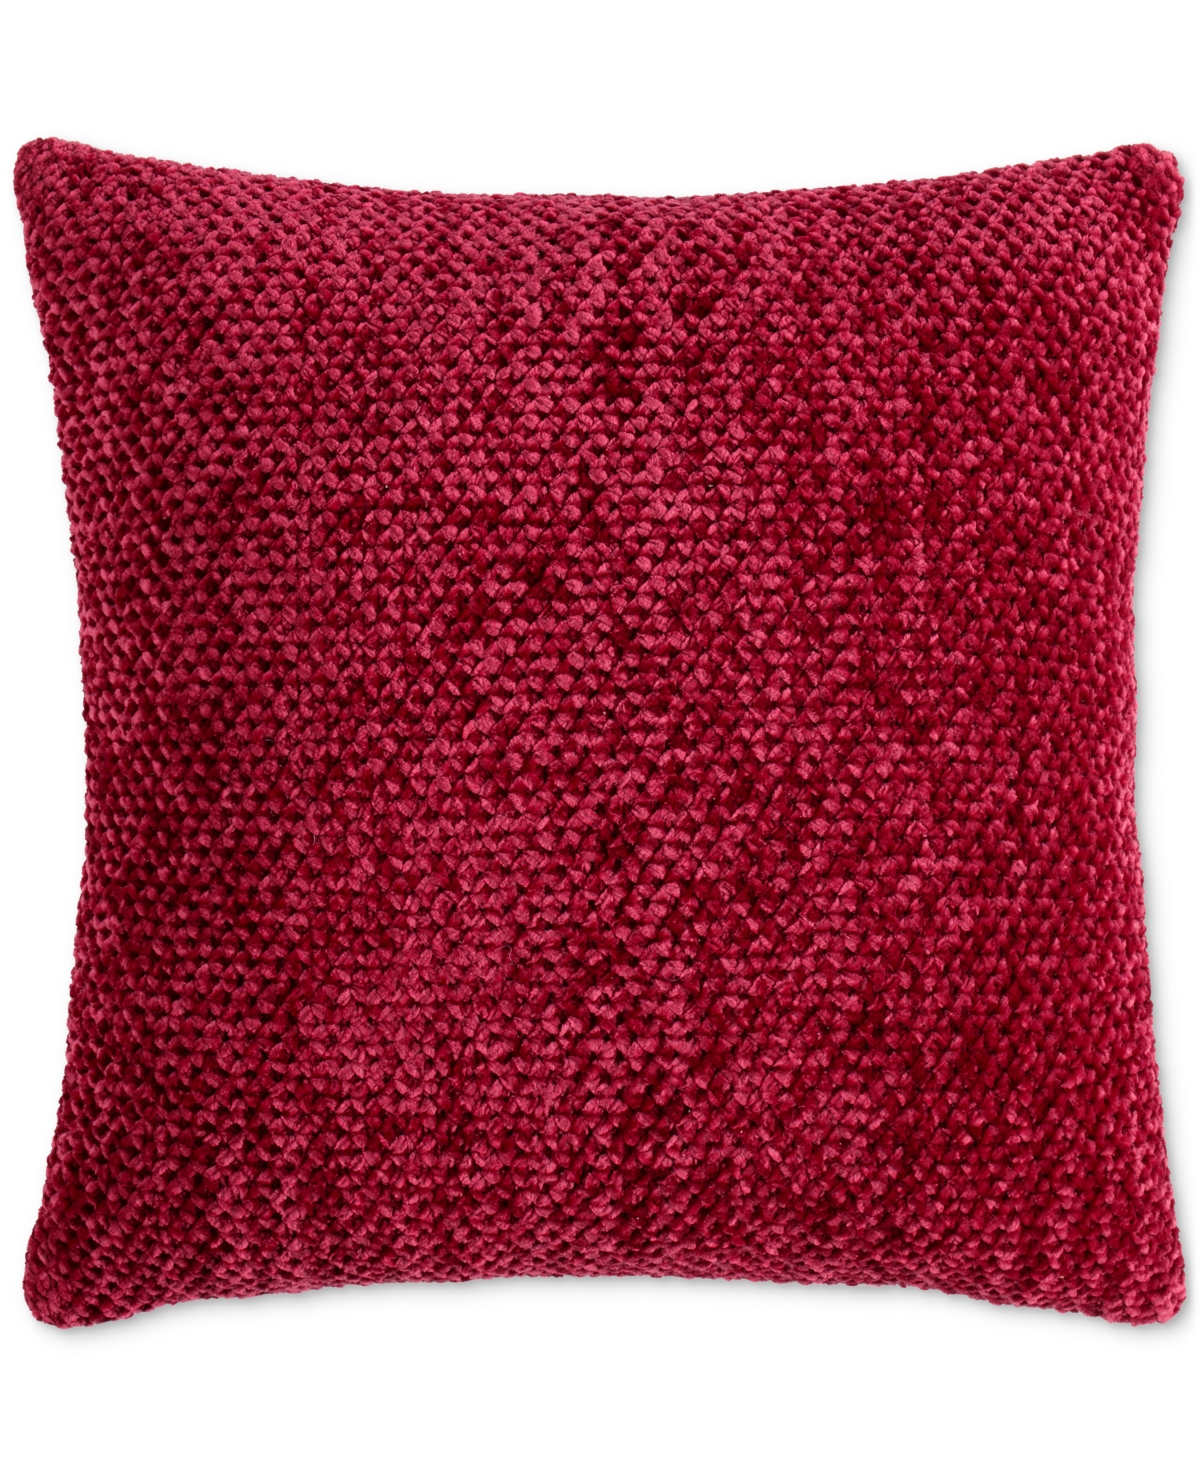 Lush Decor Braided Decorative Pillow, 18" X 18" In Rumba Red